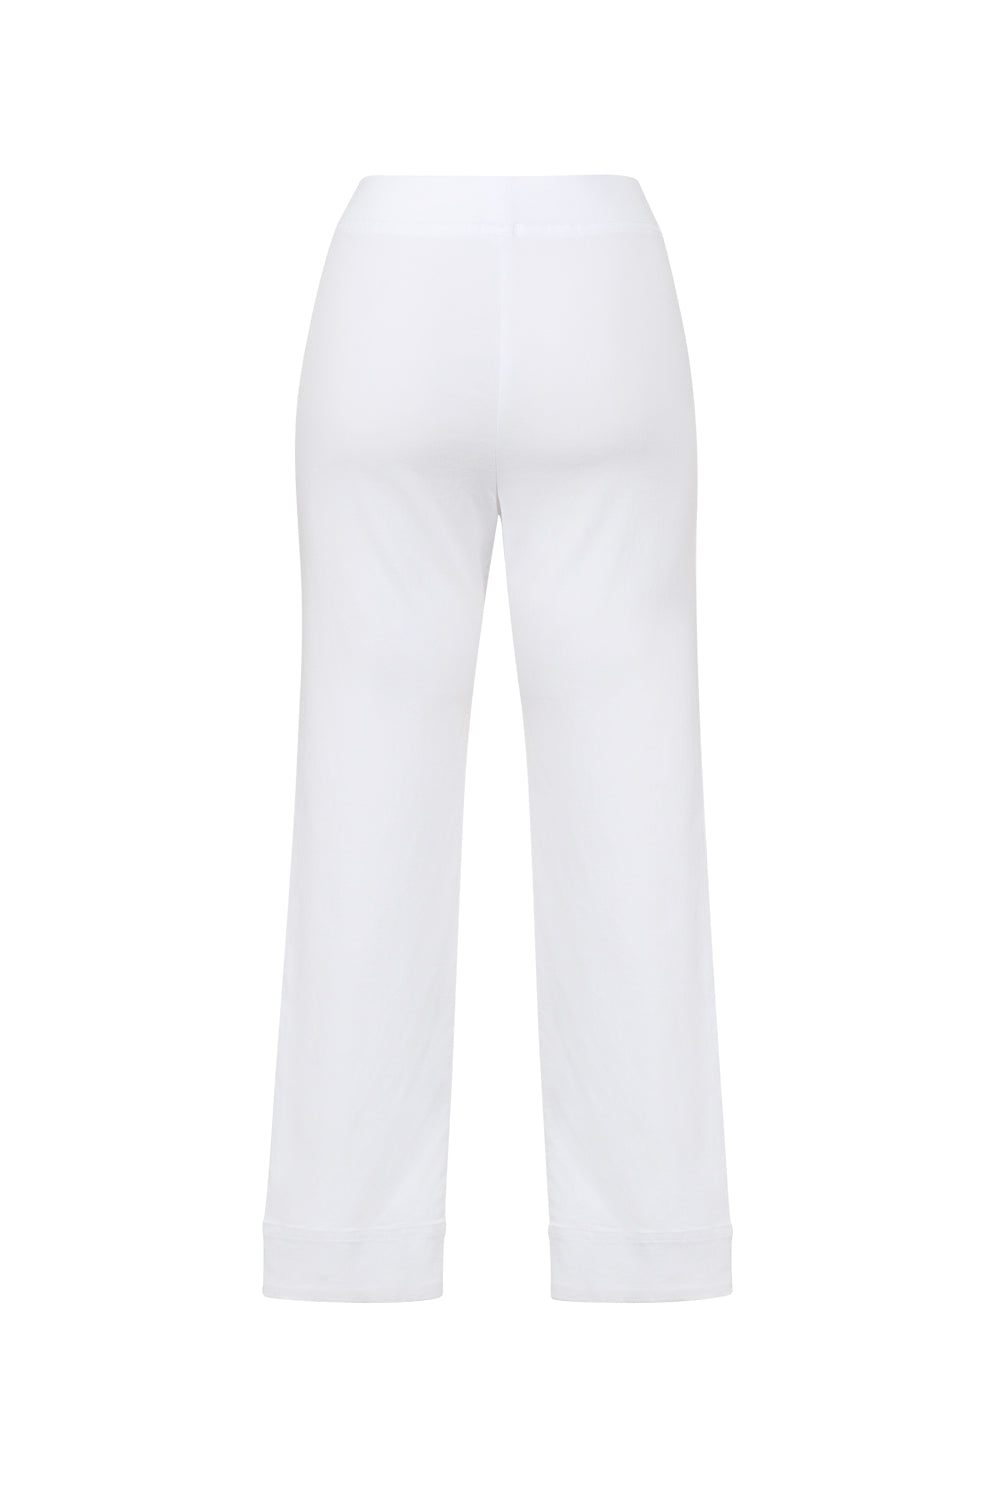 LOOBIES STORY EVERYDAY 7/8 PANT- WHITE